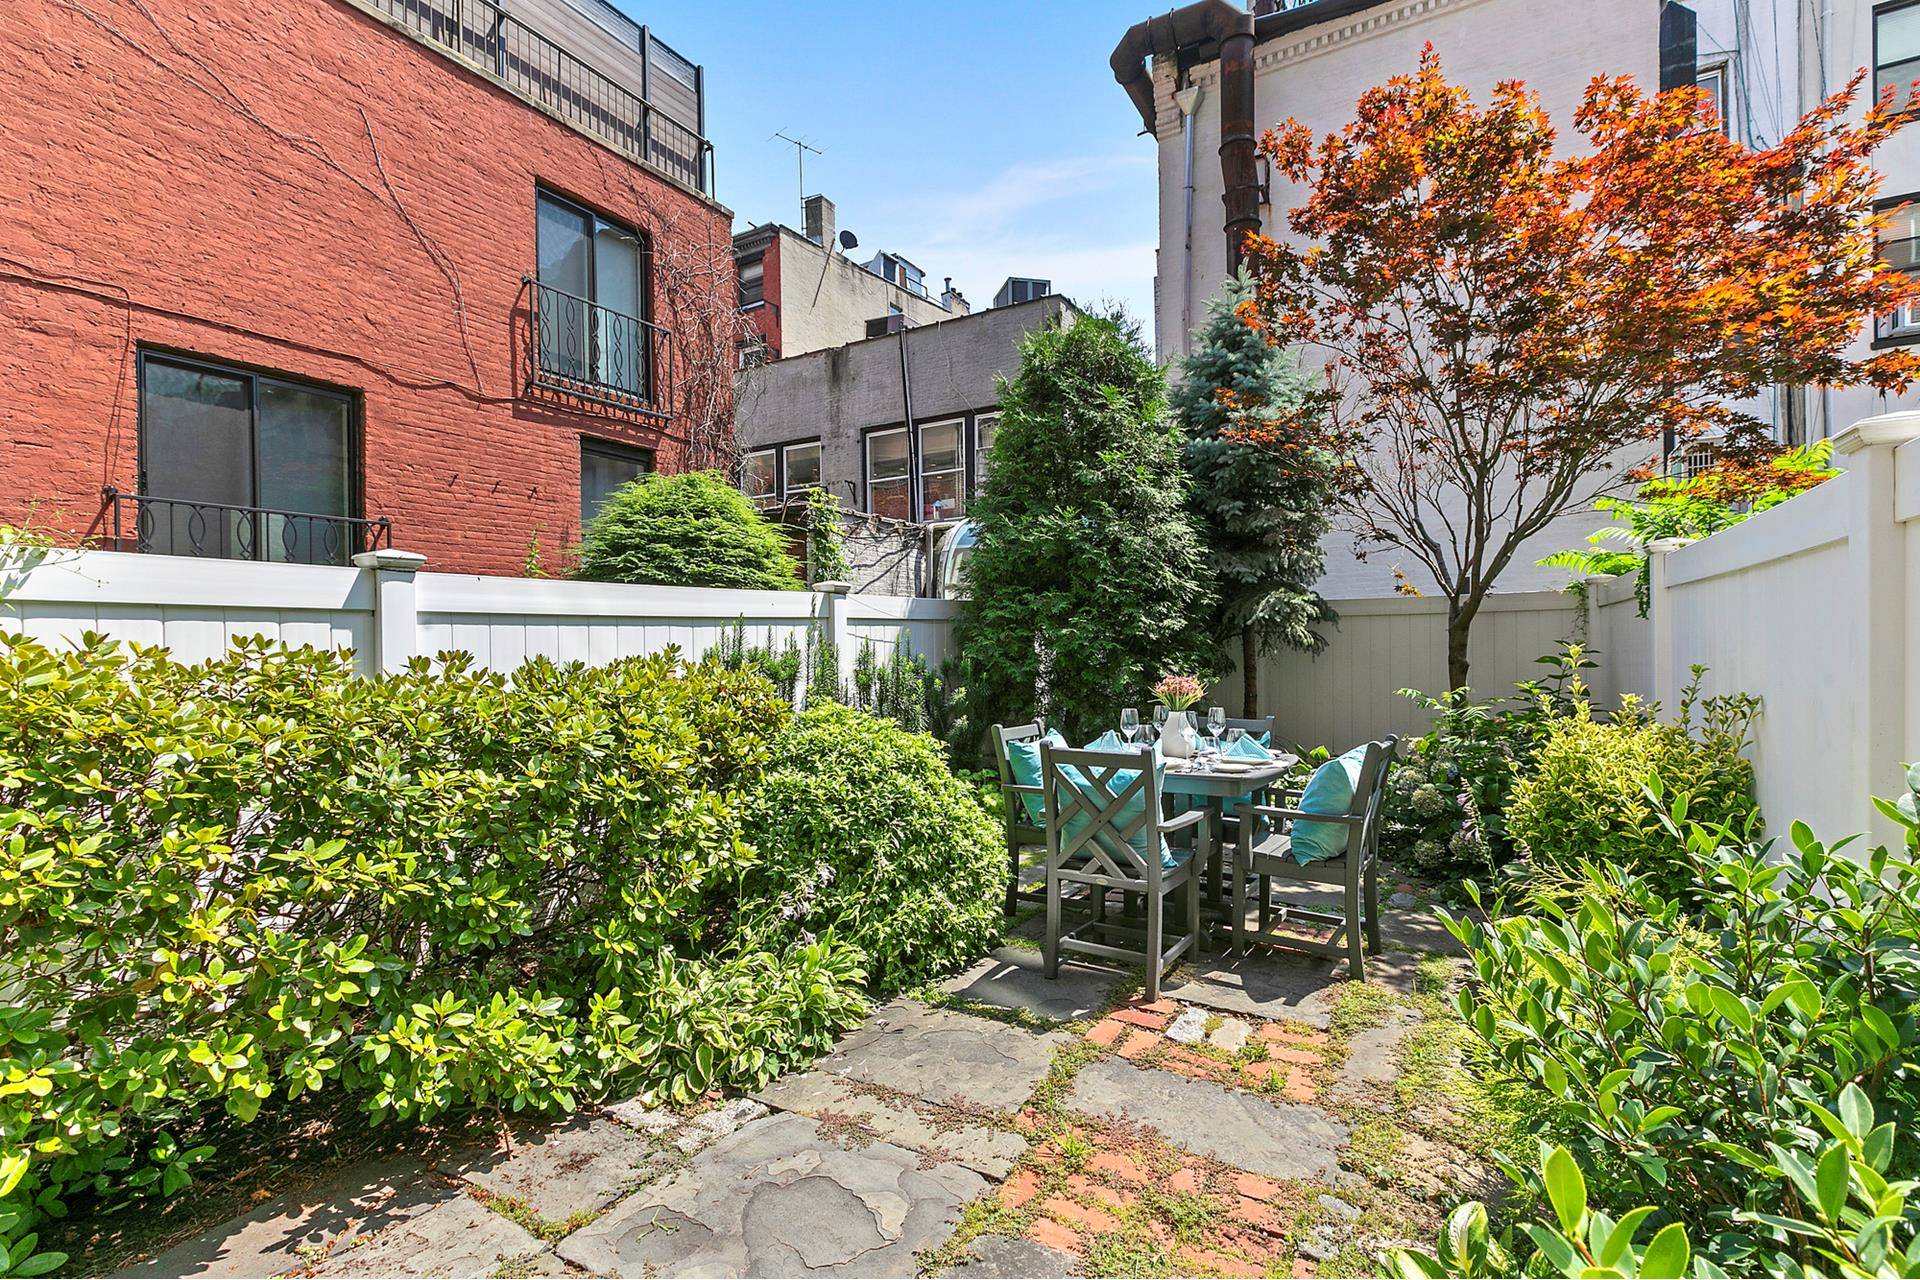 Stunning 2 Bedroom with Private Garden, WB Fireplace, W D and Central AirLocated in historic Brooklyn Heights, this quiet and sunny 2 Bedroom 1 Bath garden apartment features a large ...